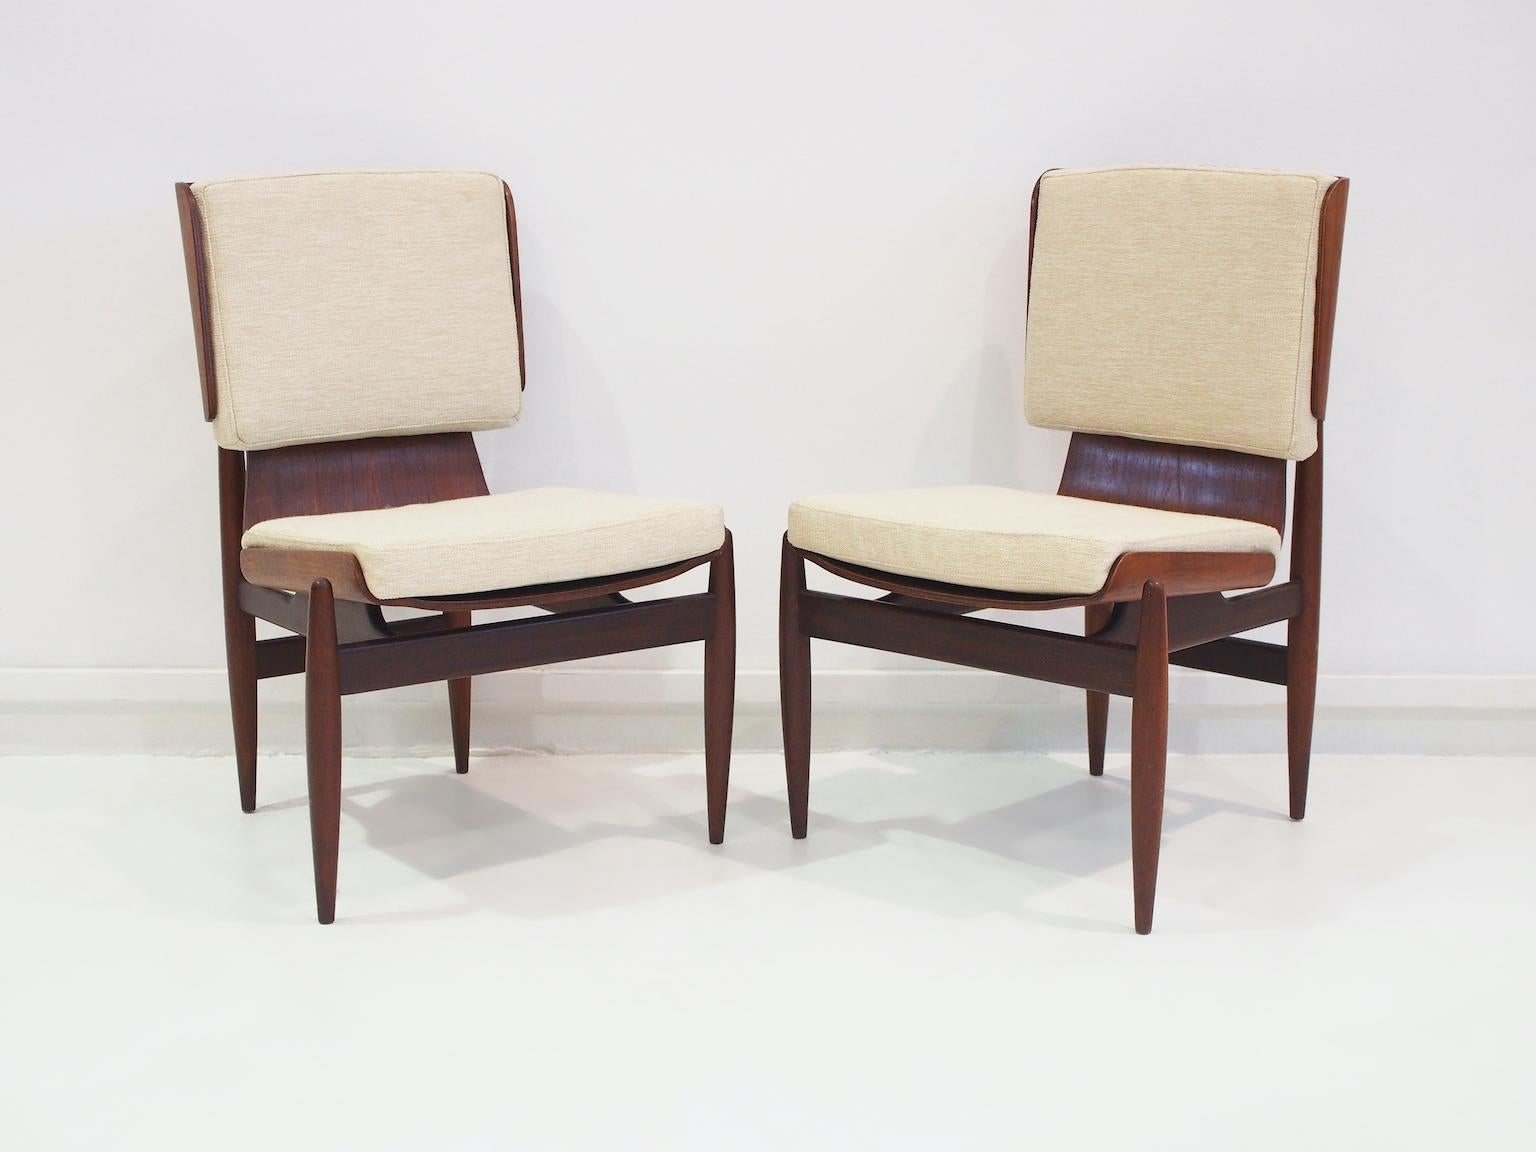 Pair of Italian Modernist Wooden Side Chairs by Barovero In Good Condition For Sale In Madrid, ES